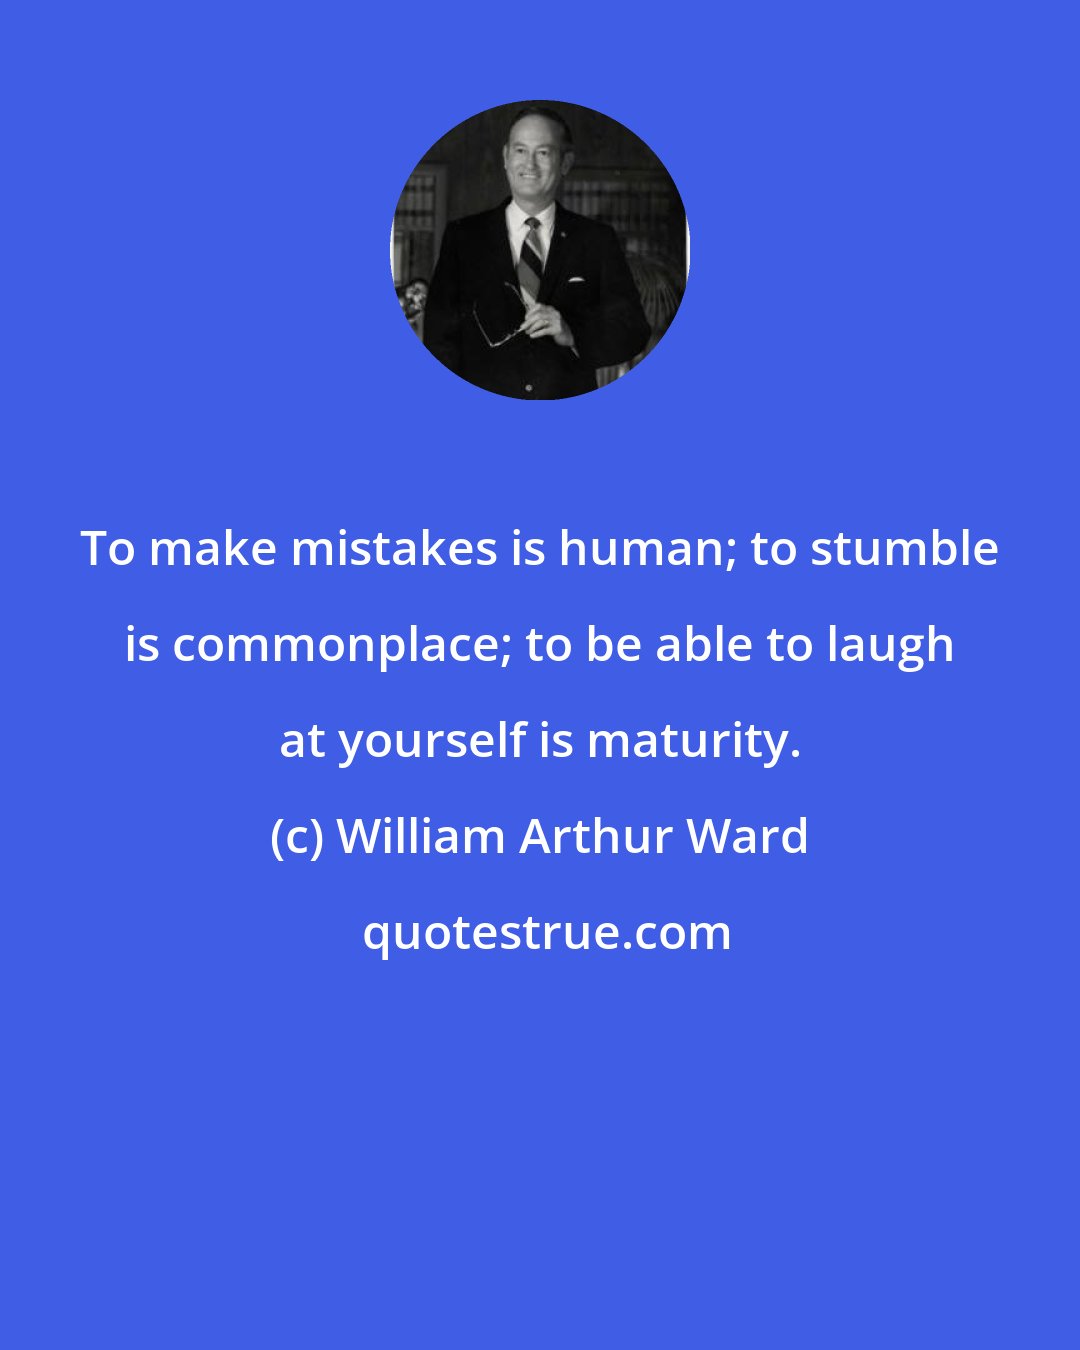 William Arthur Ward: To make mistakes is human; to stumble is commonplace; to be able to laugh at yourself is maturity.